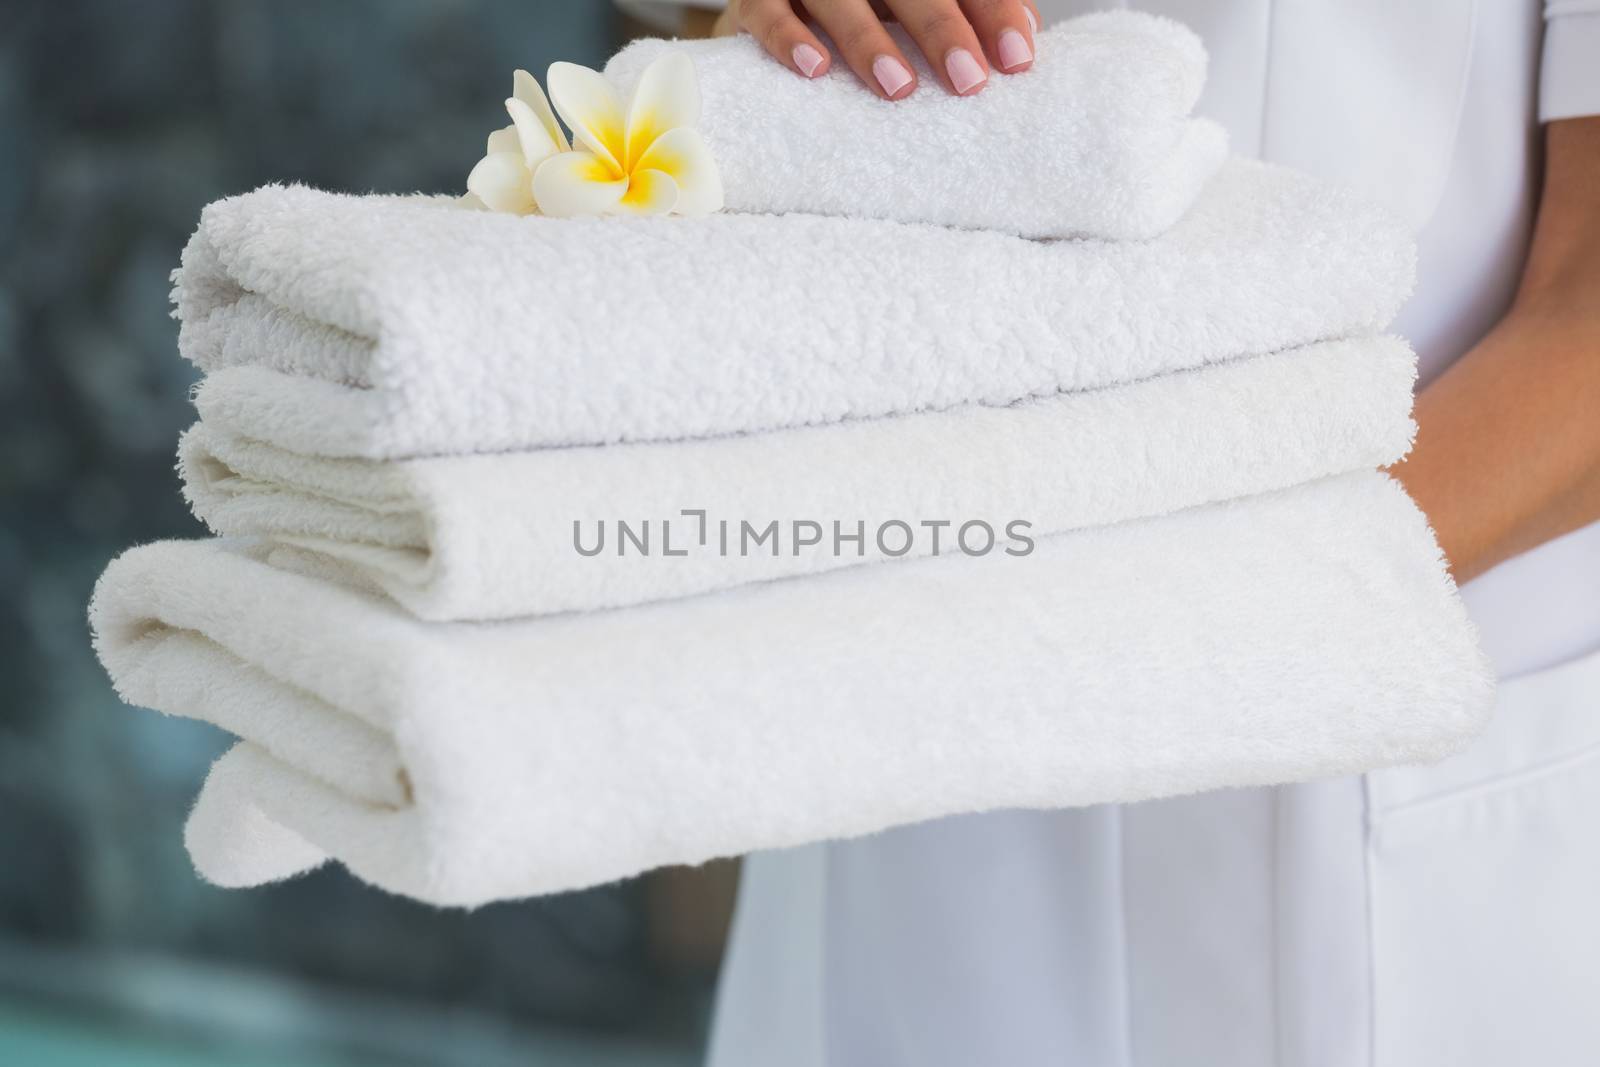 Beauty therapist holding pile of fresh white towels at the spa